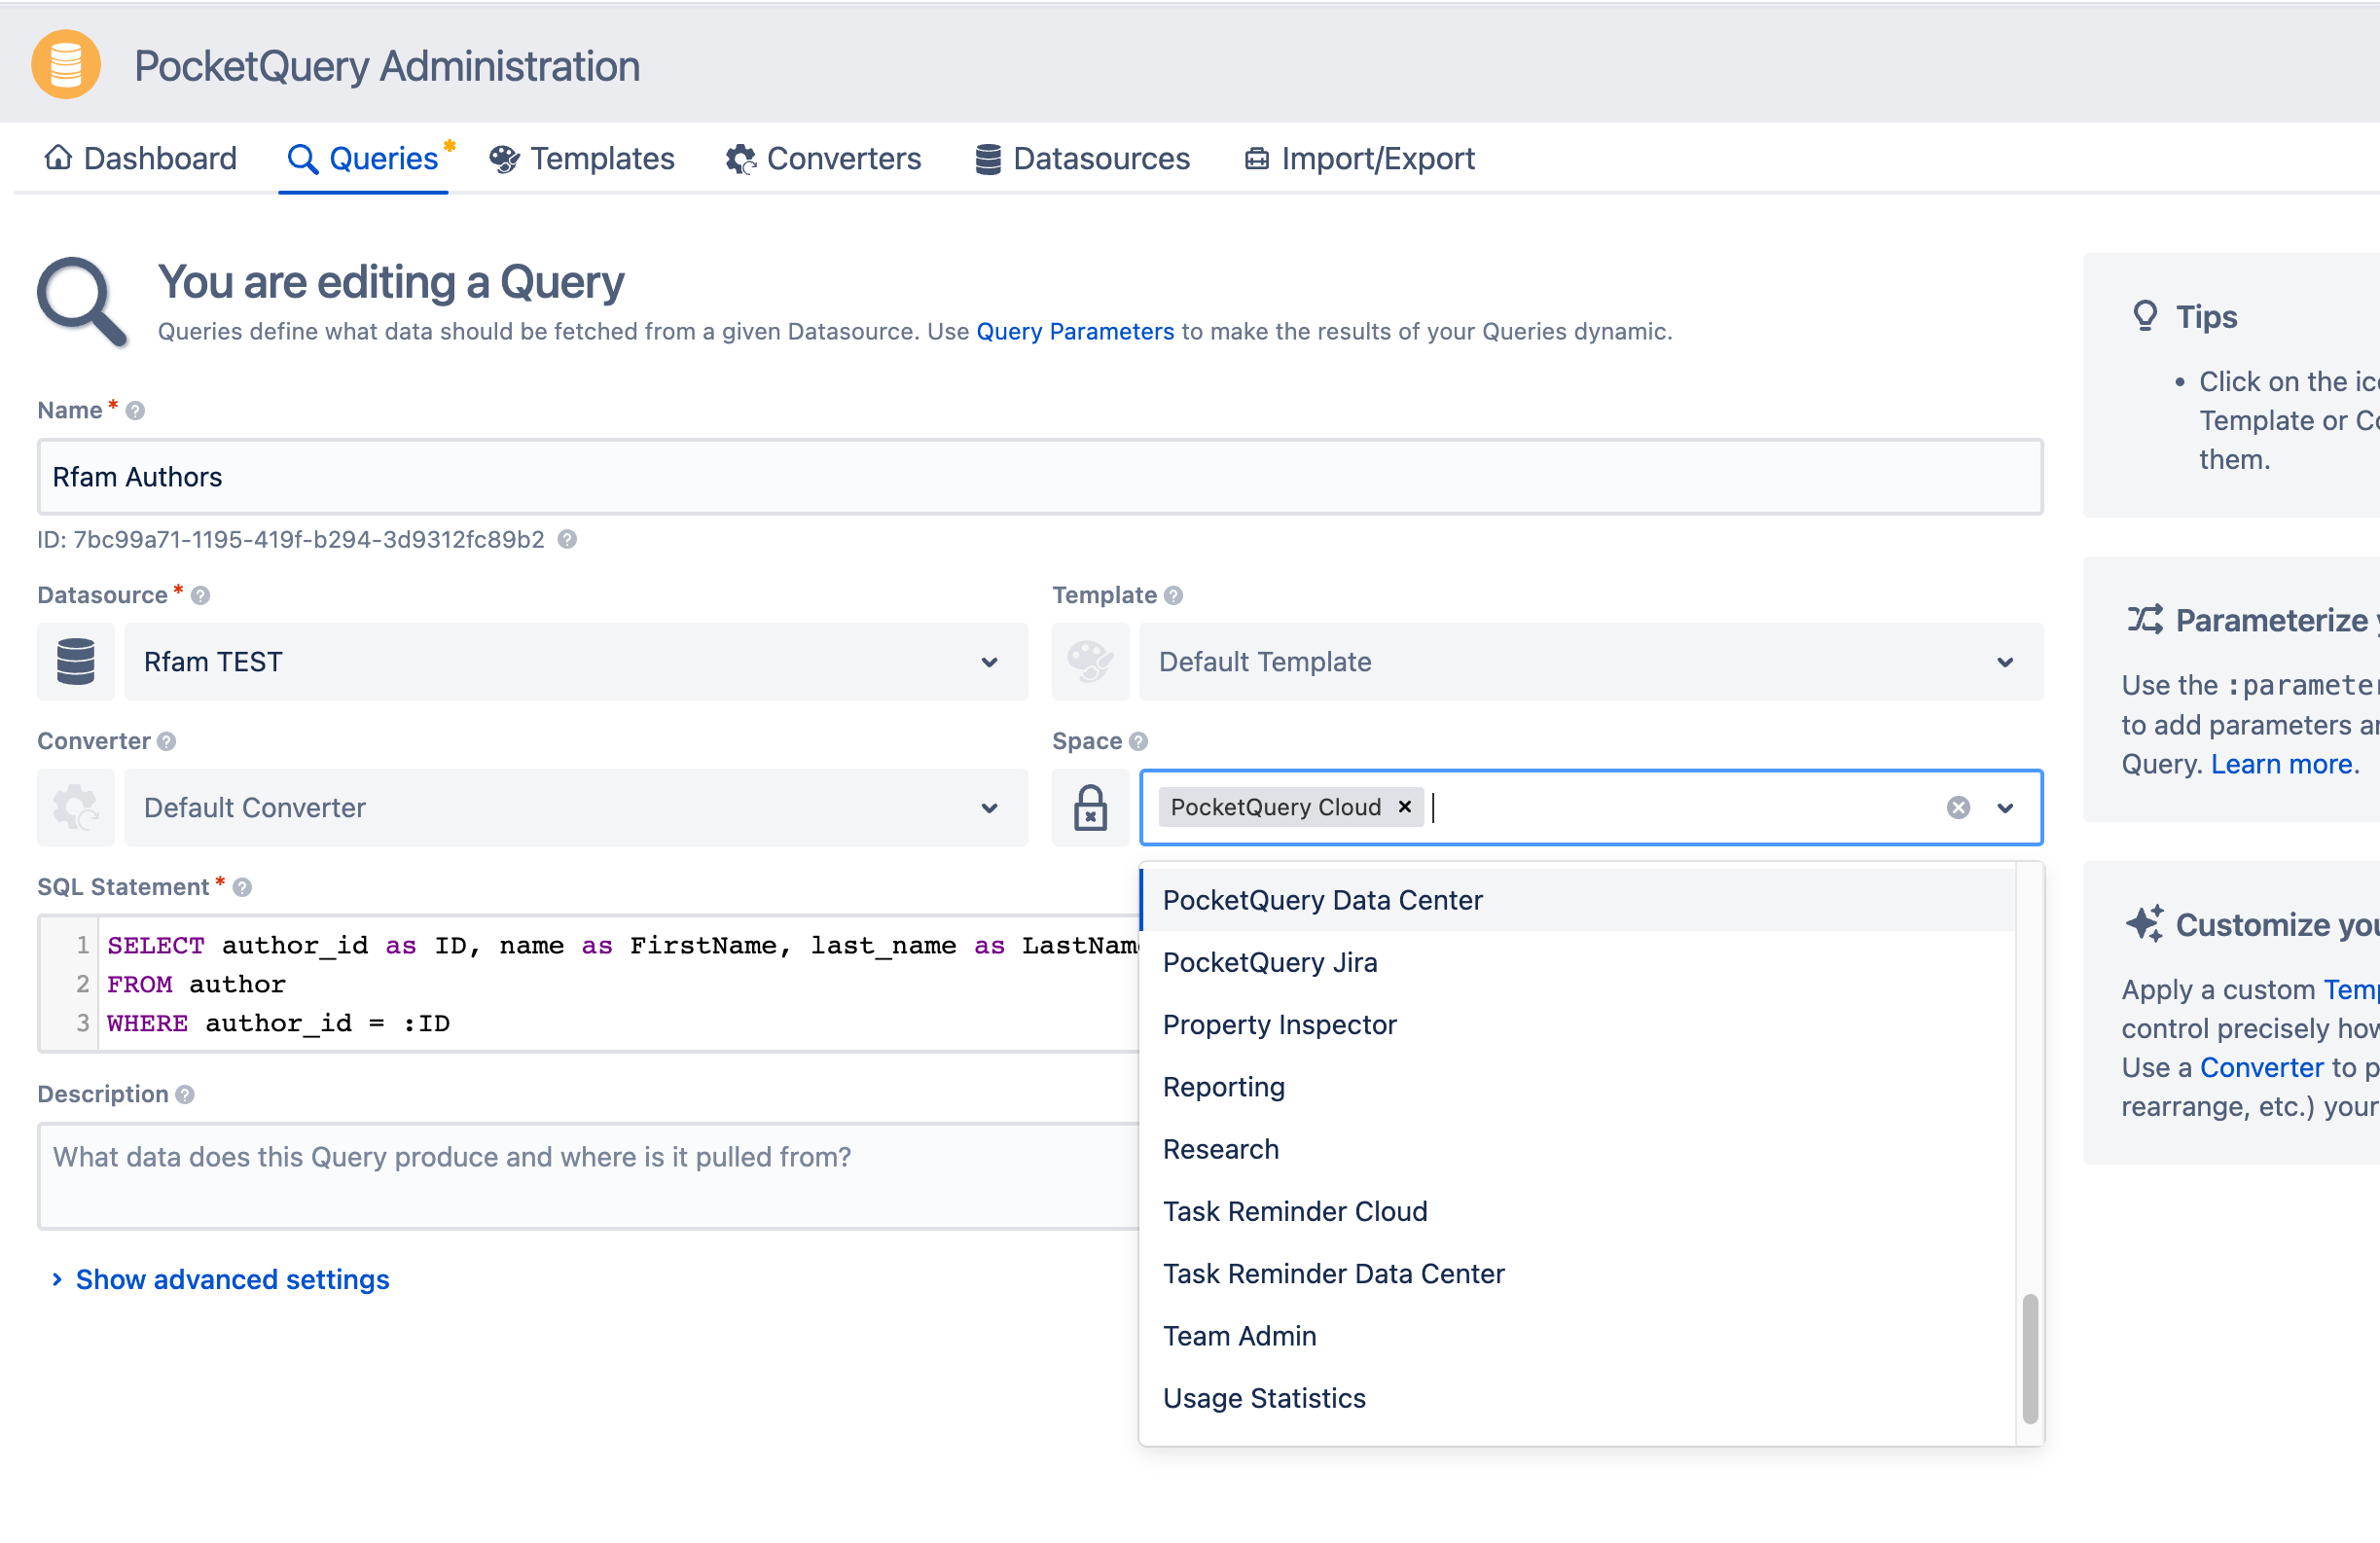 Restrict Queries to Spaces in PocketQuery Cloud